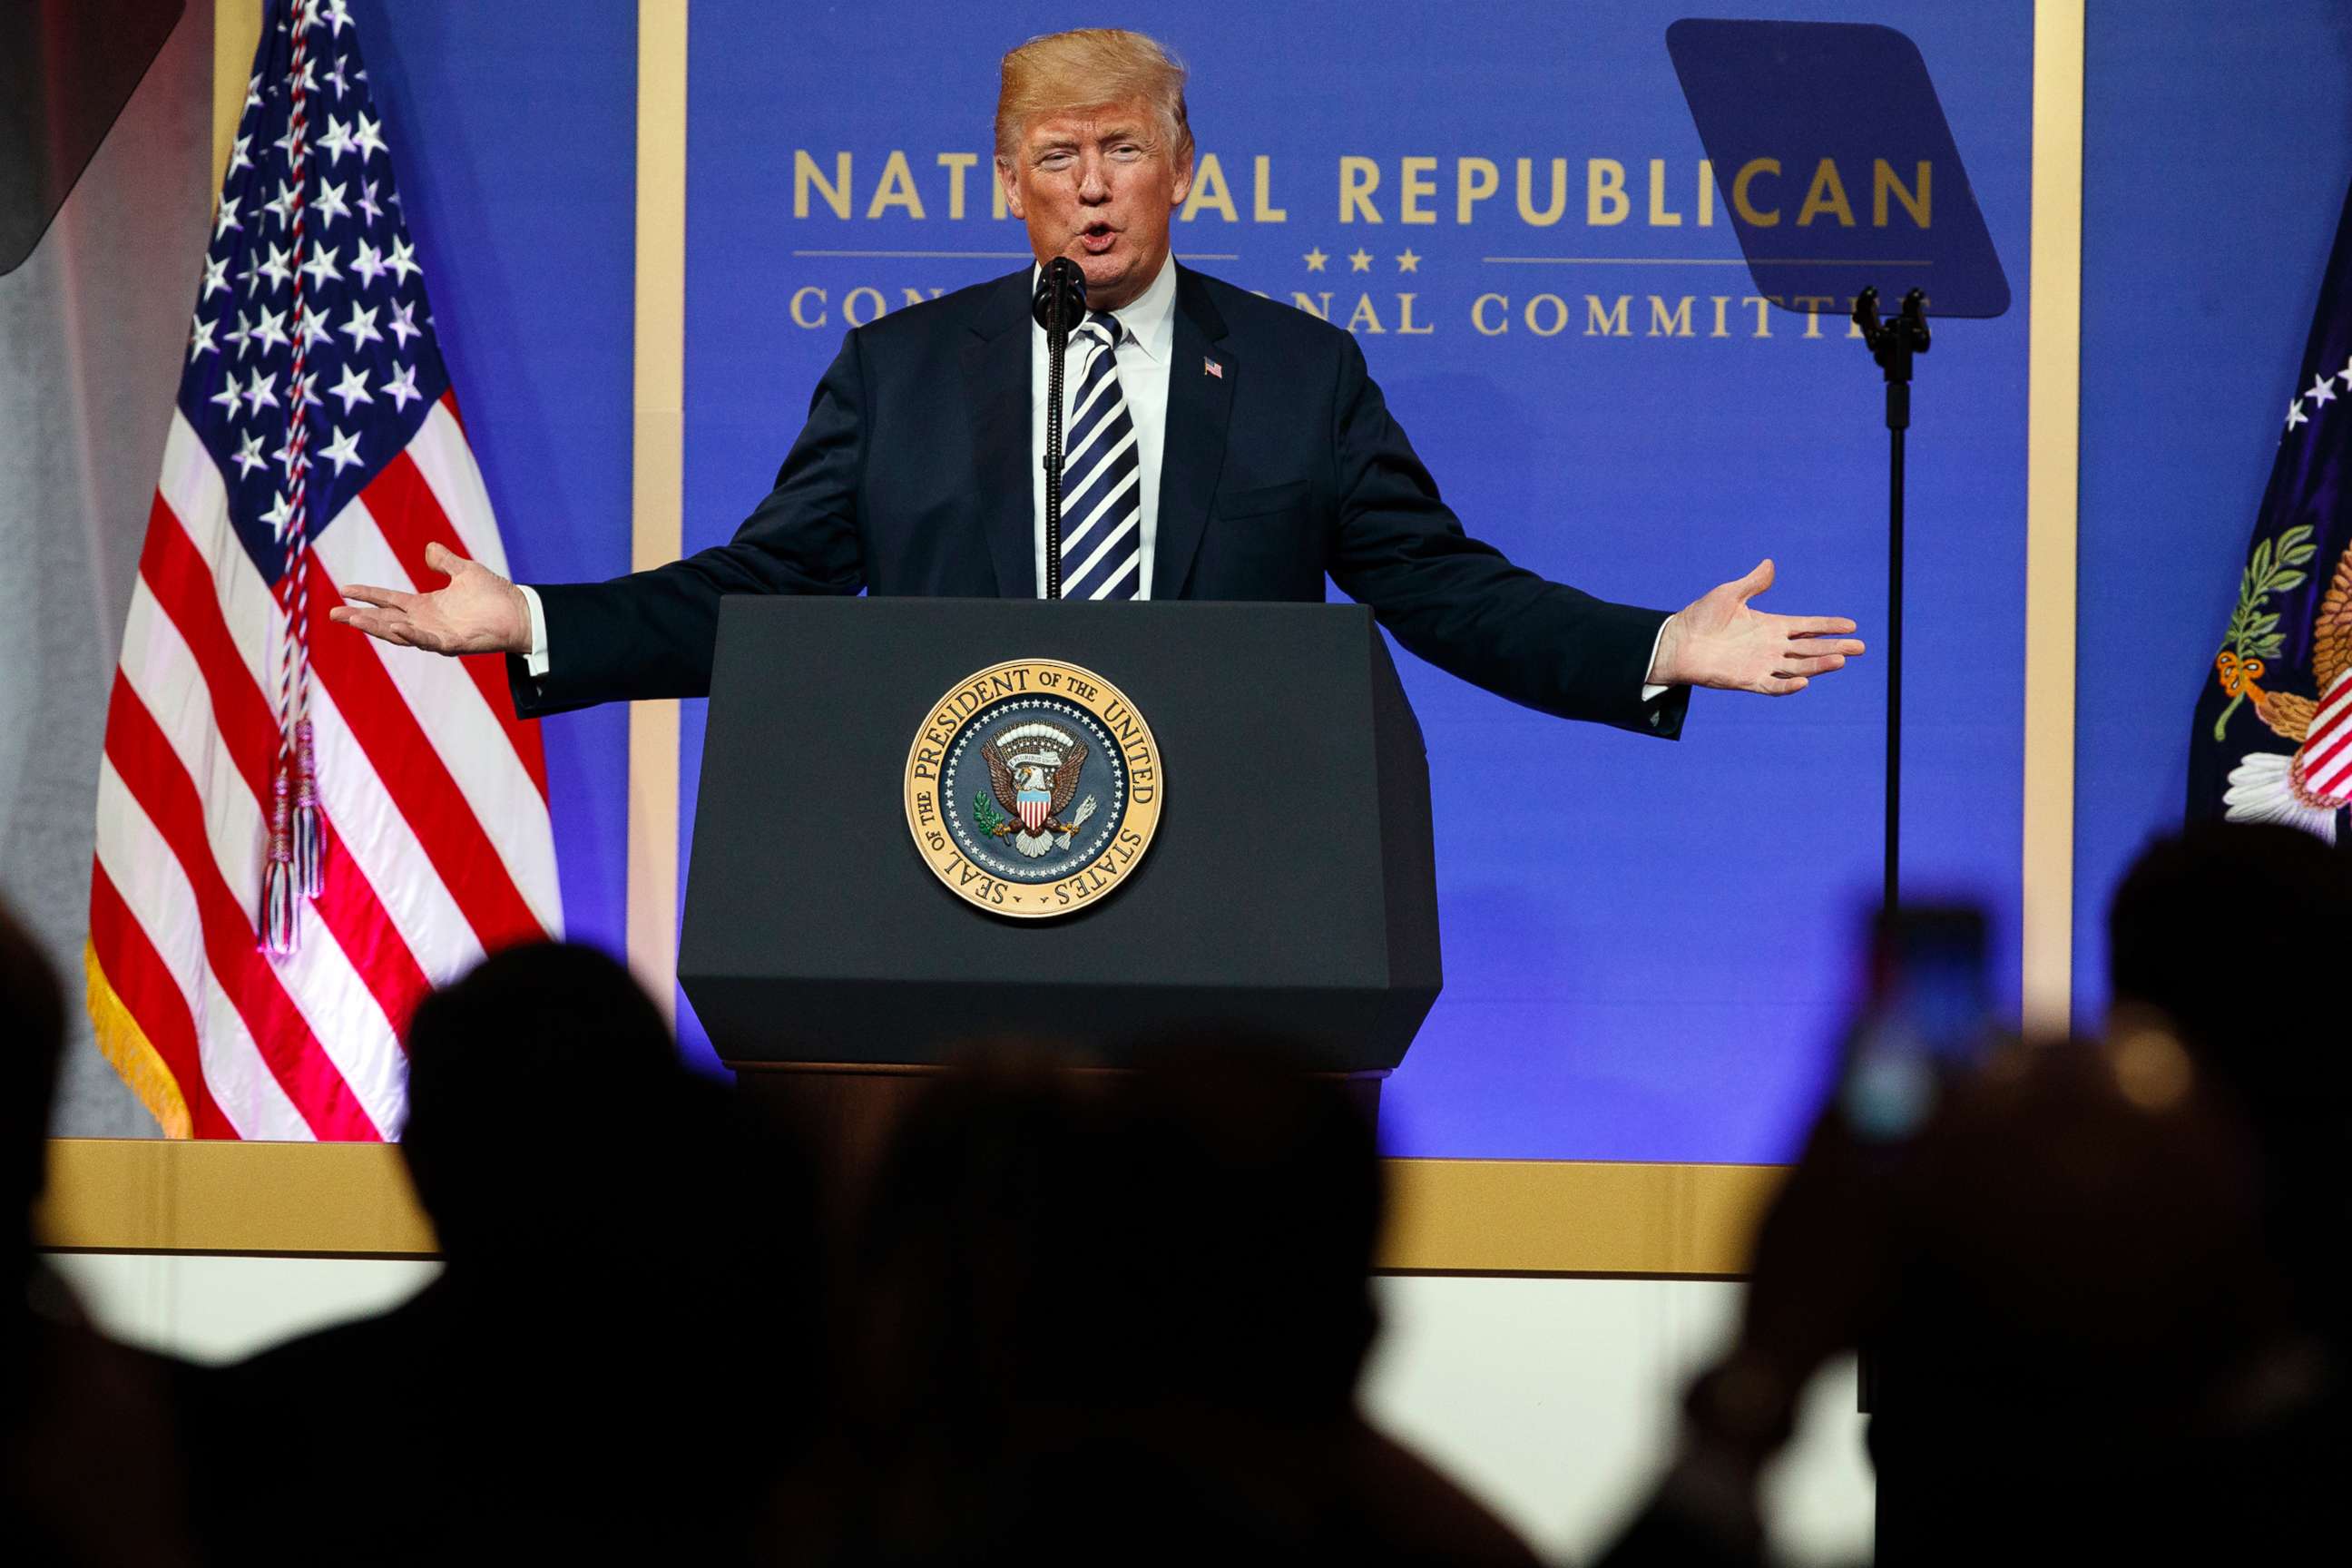 PHOTO: President Donald Trump speaks at the National Republican Congressional Committee March Dinner in Washington, D.C., March 20, 2018.